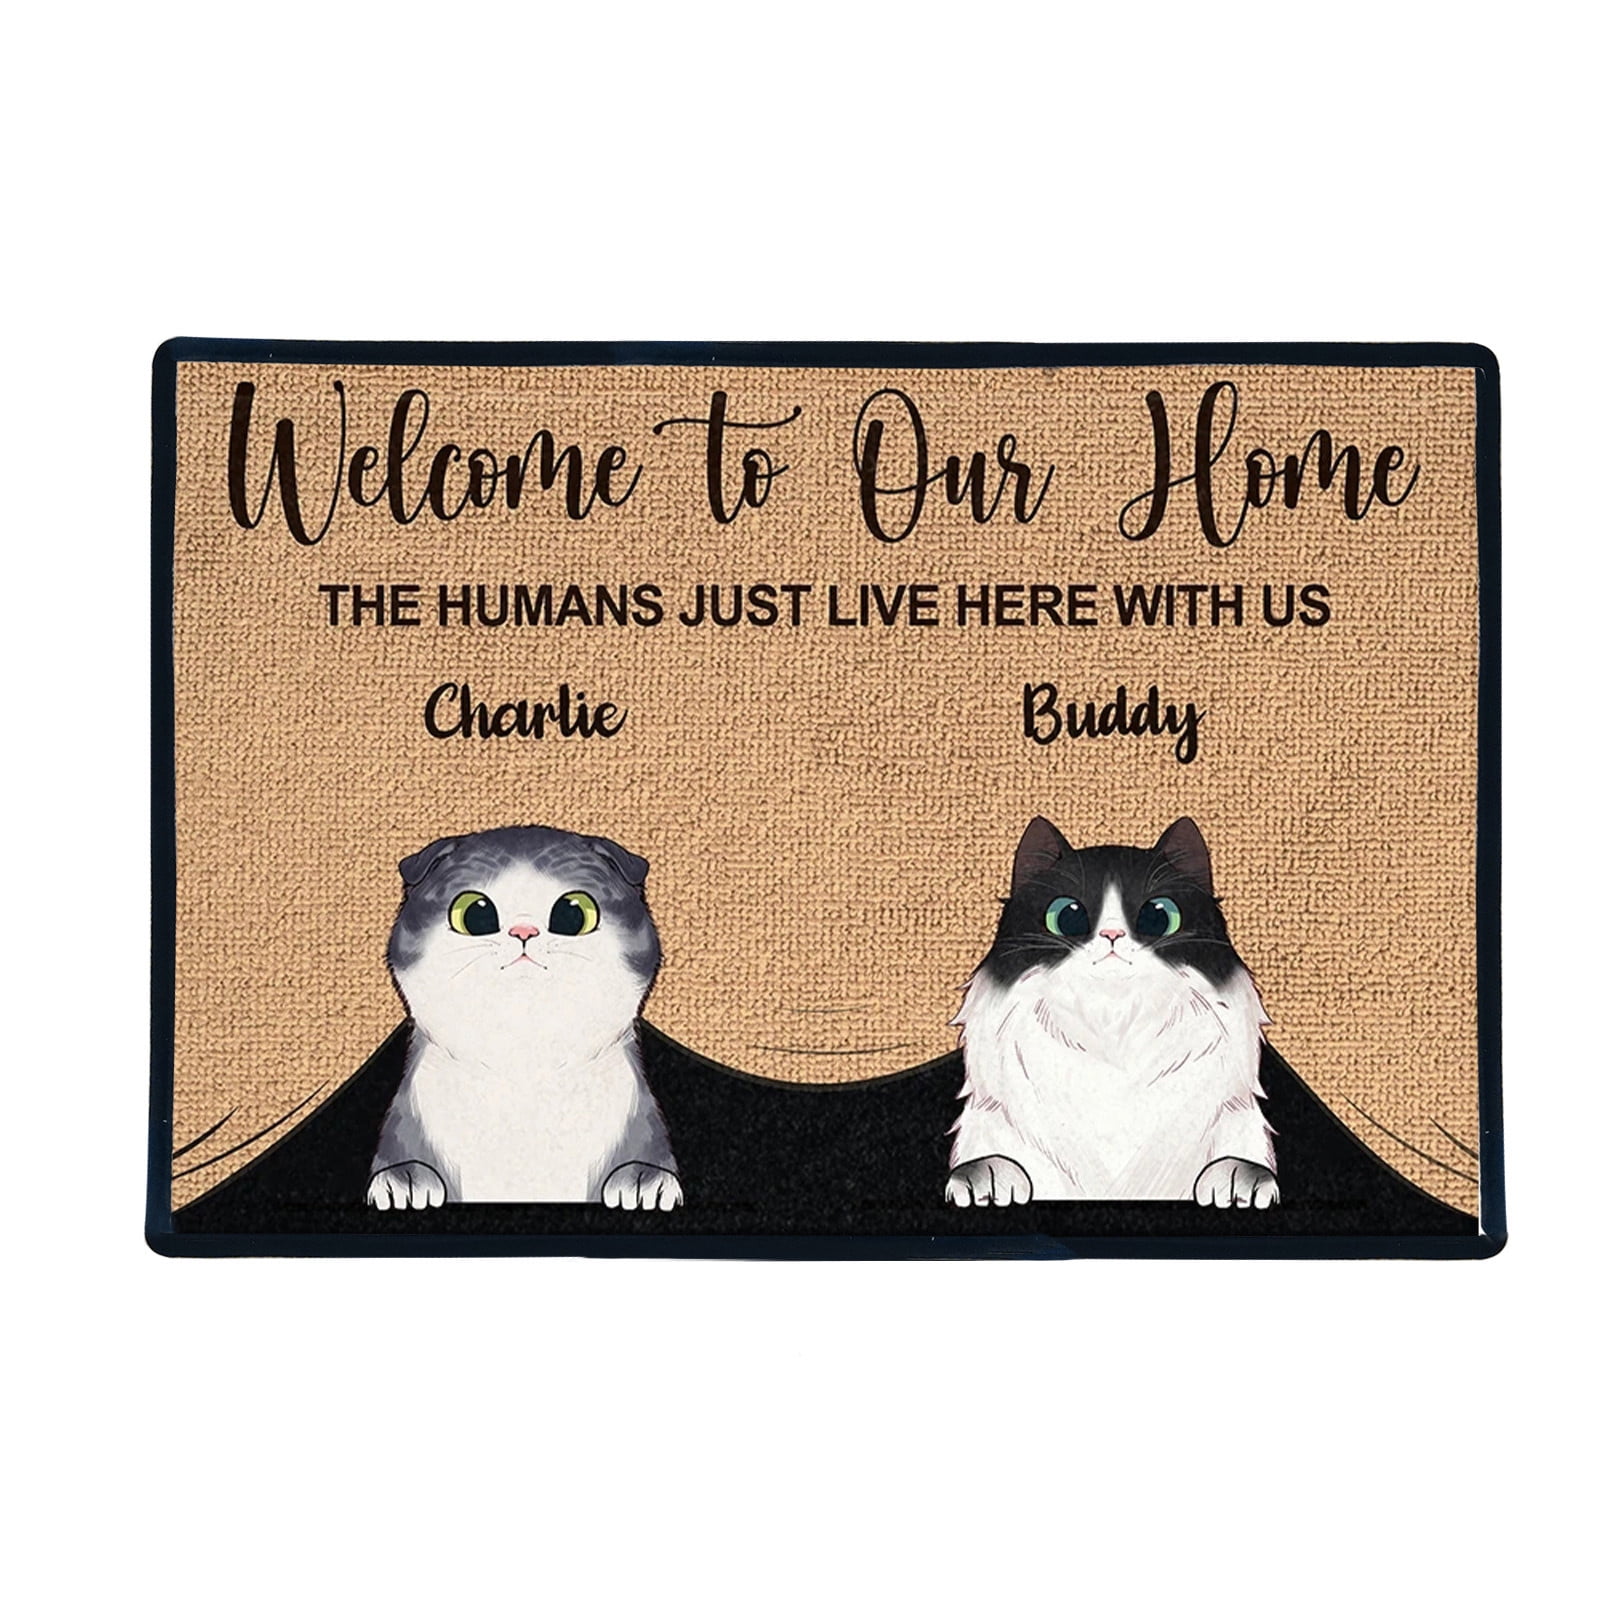 personalized doormat Life is full of choices choose wisely doormat home decor welcome mat